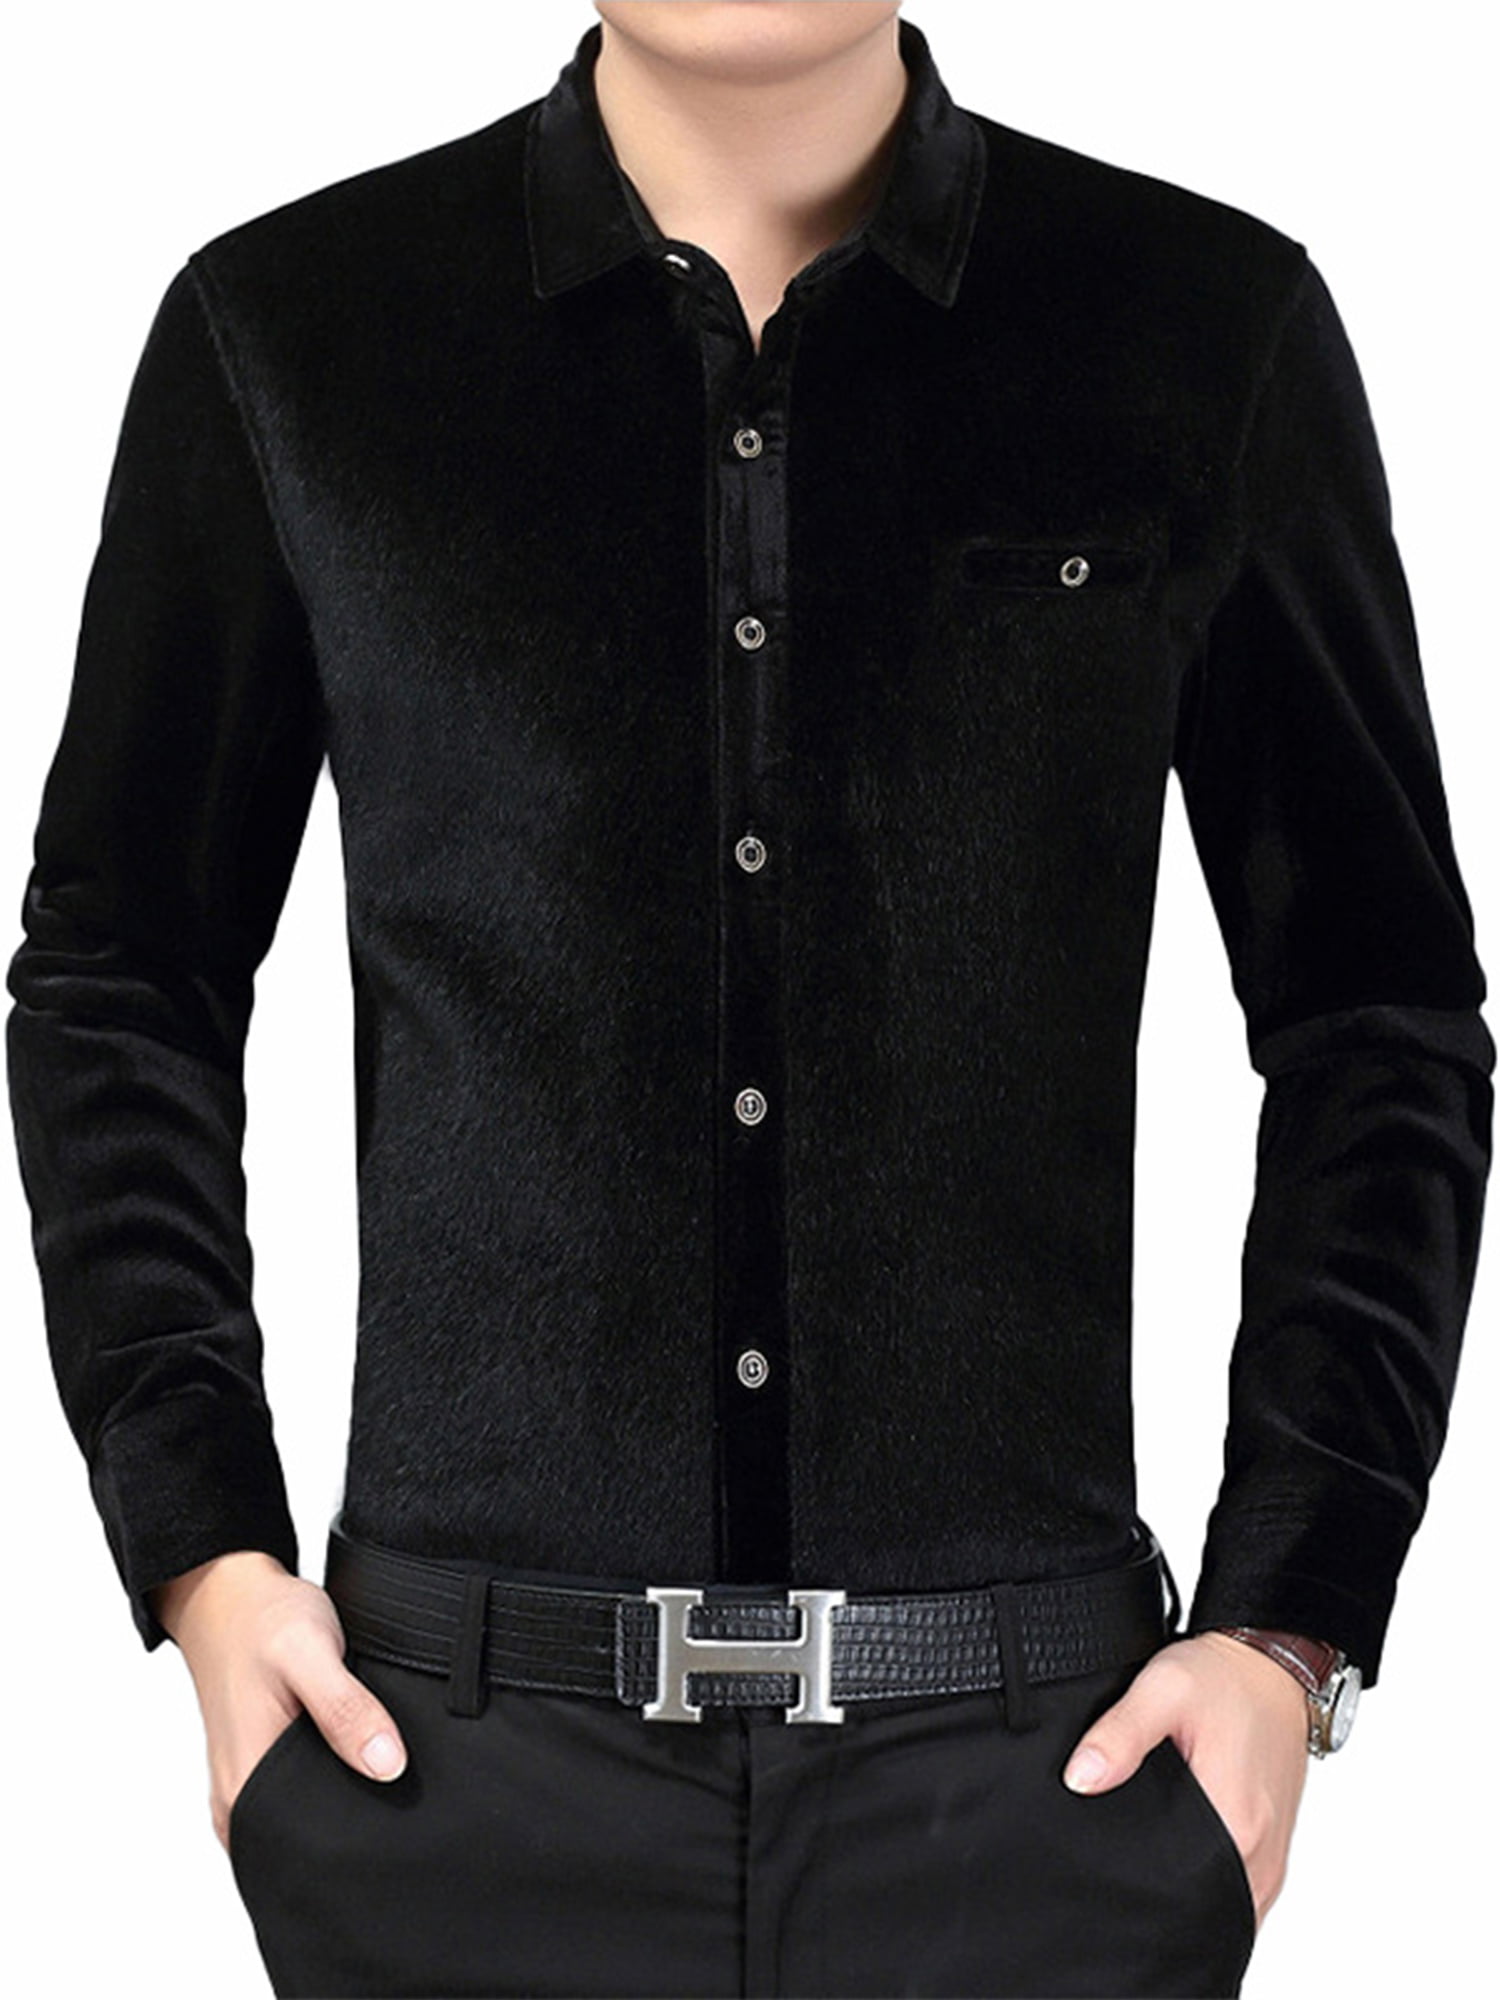 Men's Tidy Casual Long Sleeve Dress Shirts Button Down Slim Fit Shirt Solid Tops